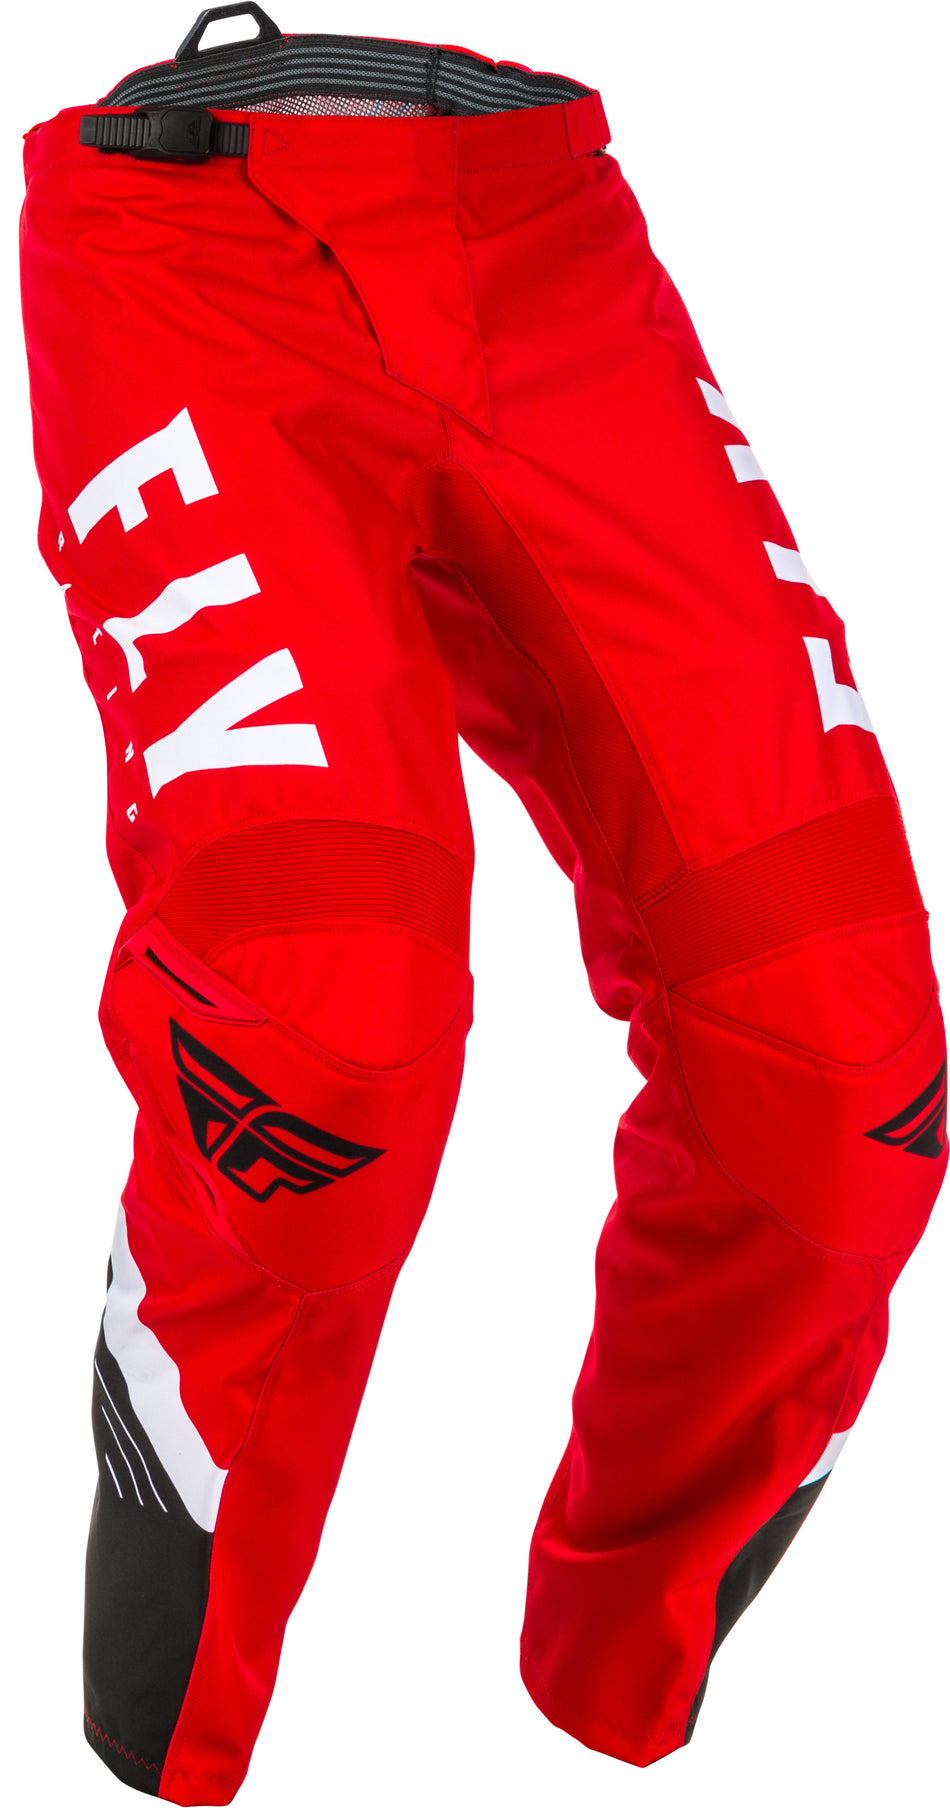 FLY RACING F-16 Pants Red/Black/White Sz 28s 373-93328S